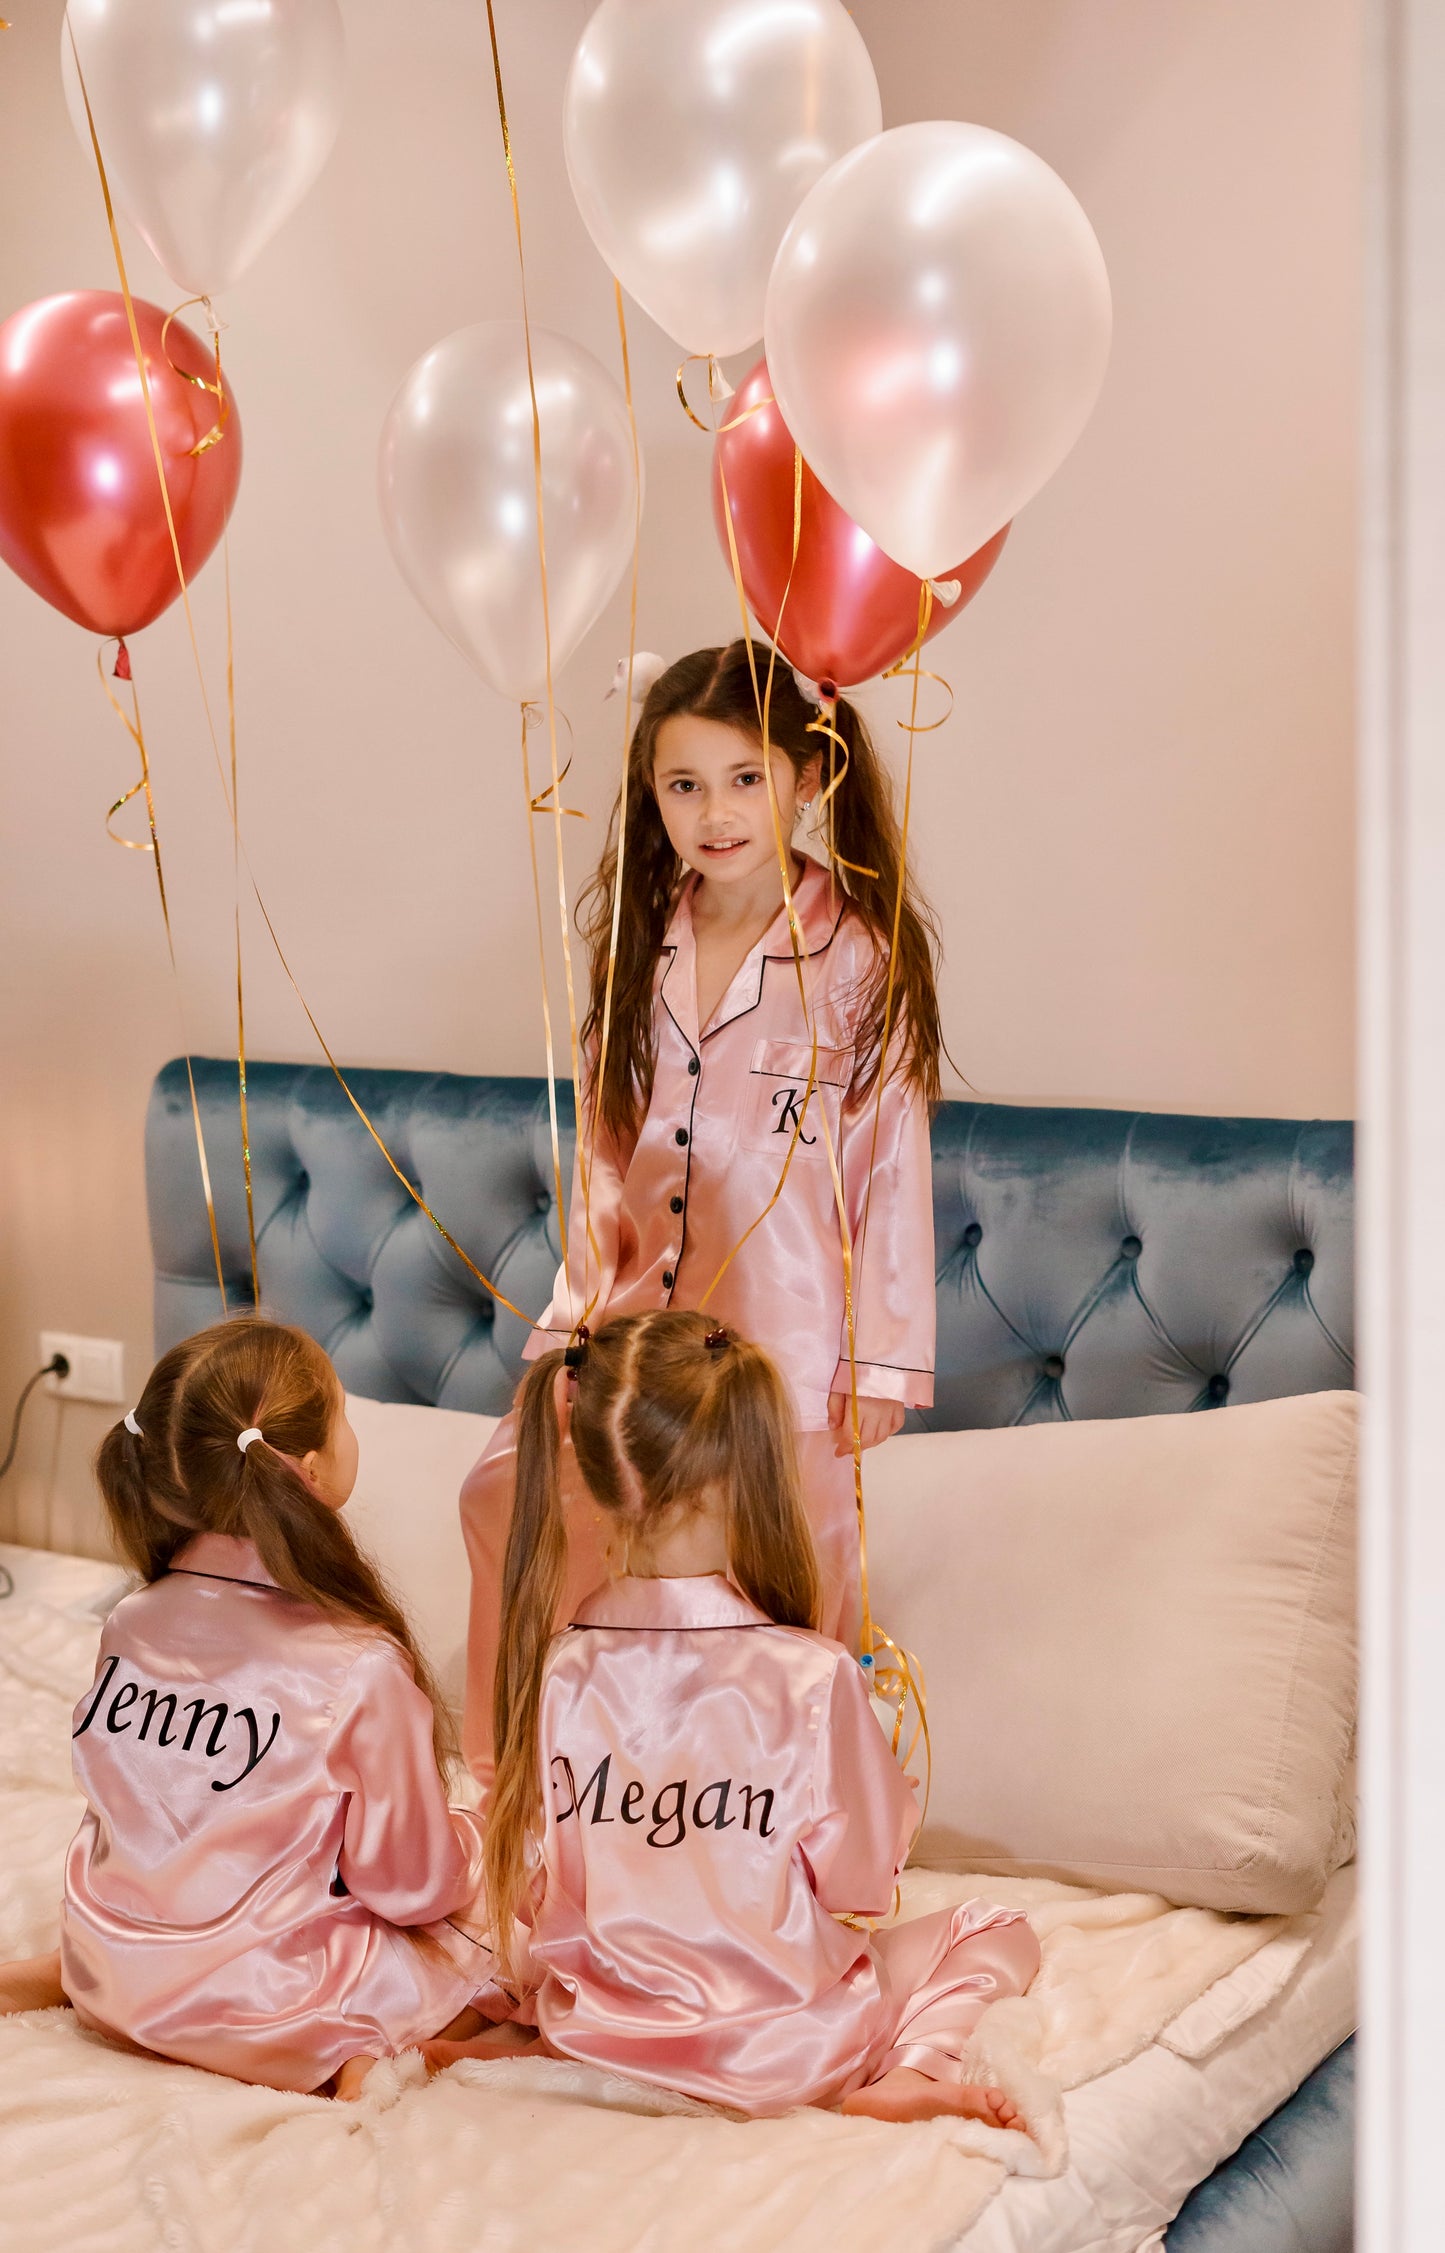 Kids Satin Personalized Pajamas for Sleepover Party L+L